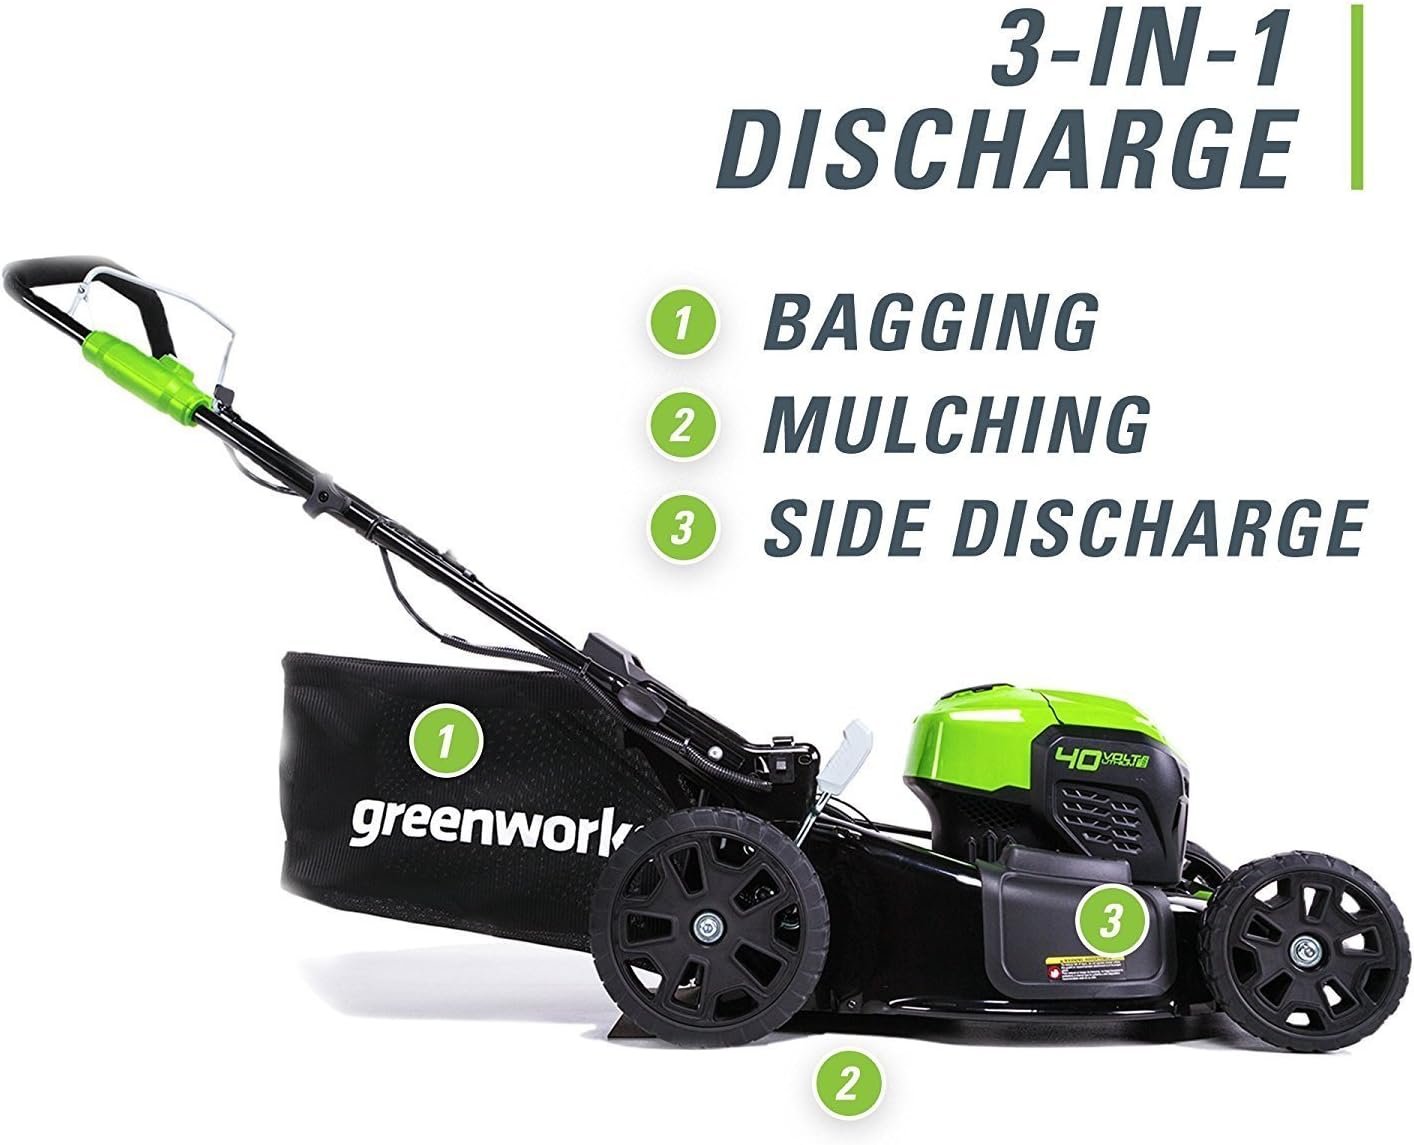 Greenworks 40V 21 inch Self-Propelled Cordless Lawn Mower Review